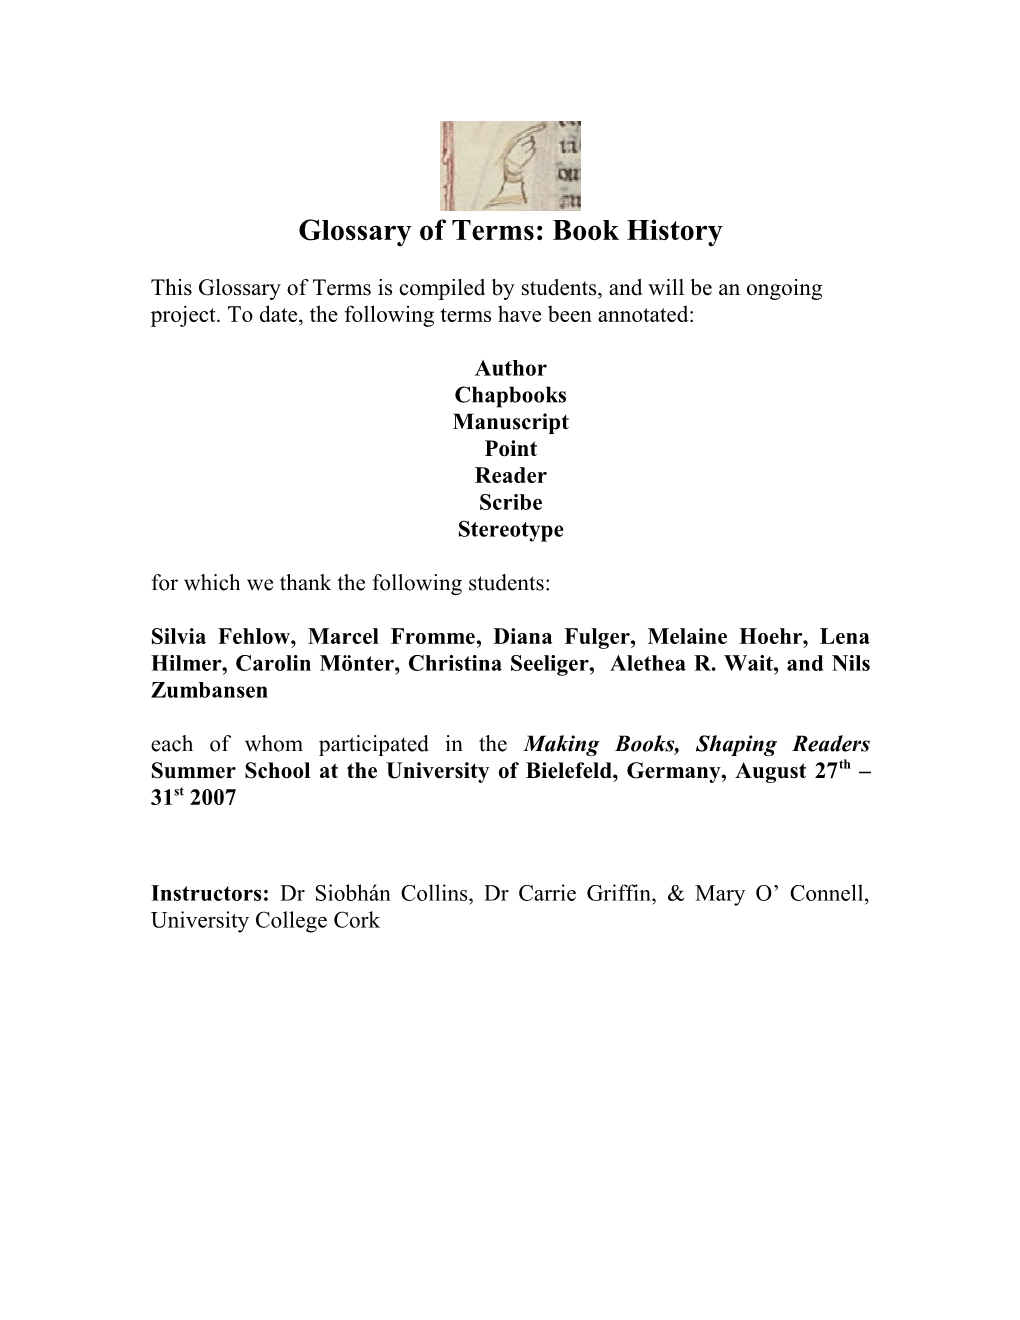 Glossary of Terms: Book History